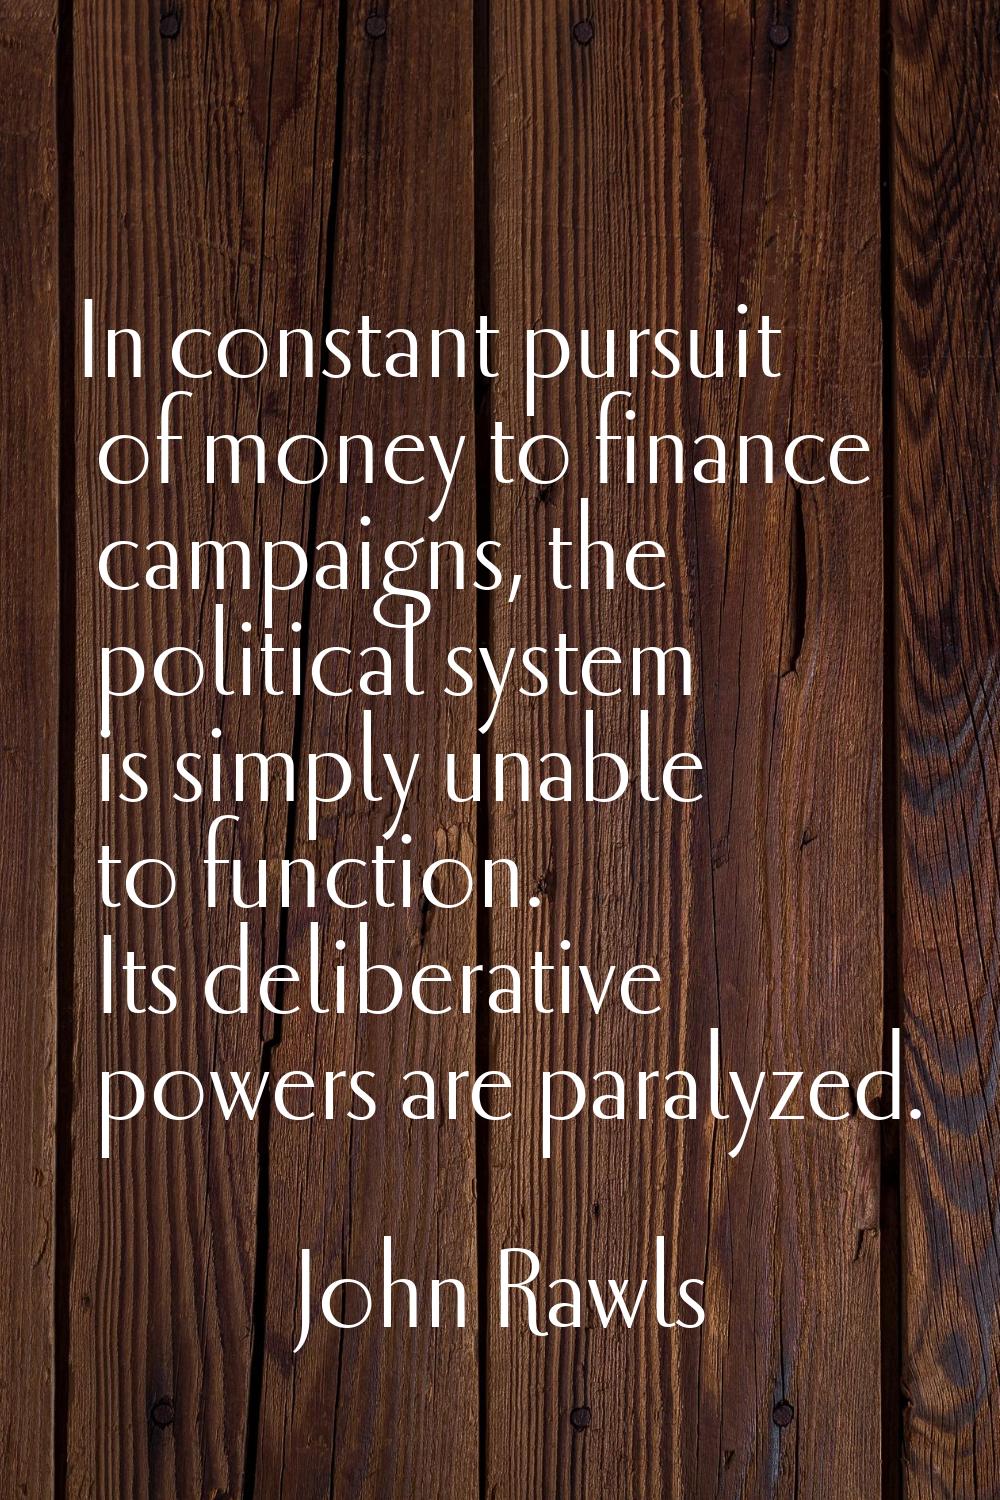 In constant pursuit of money to finance campaigns, the political system is simply unable to functio